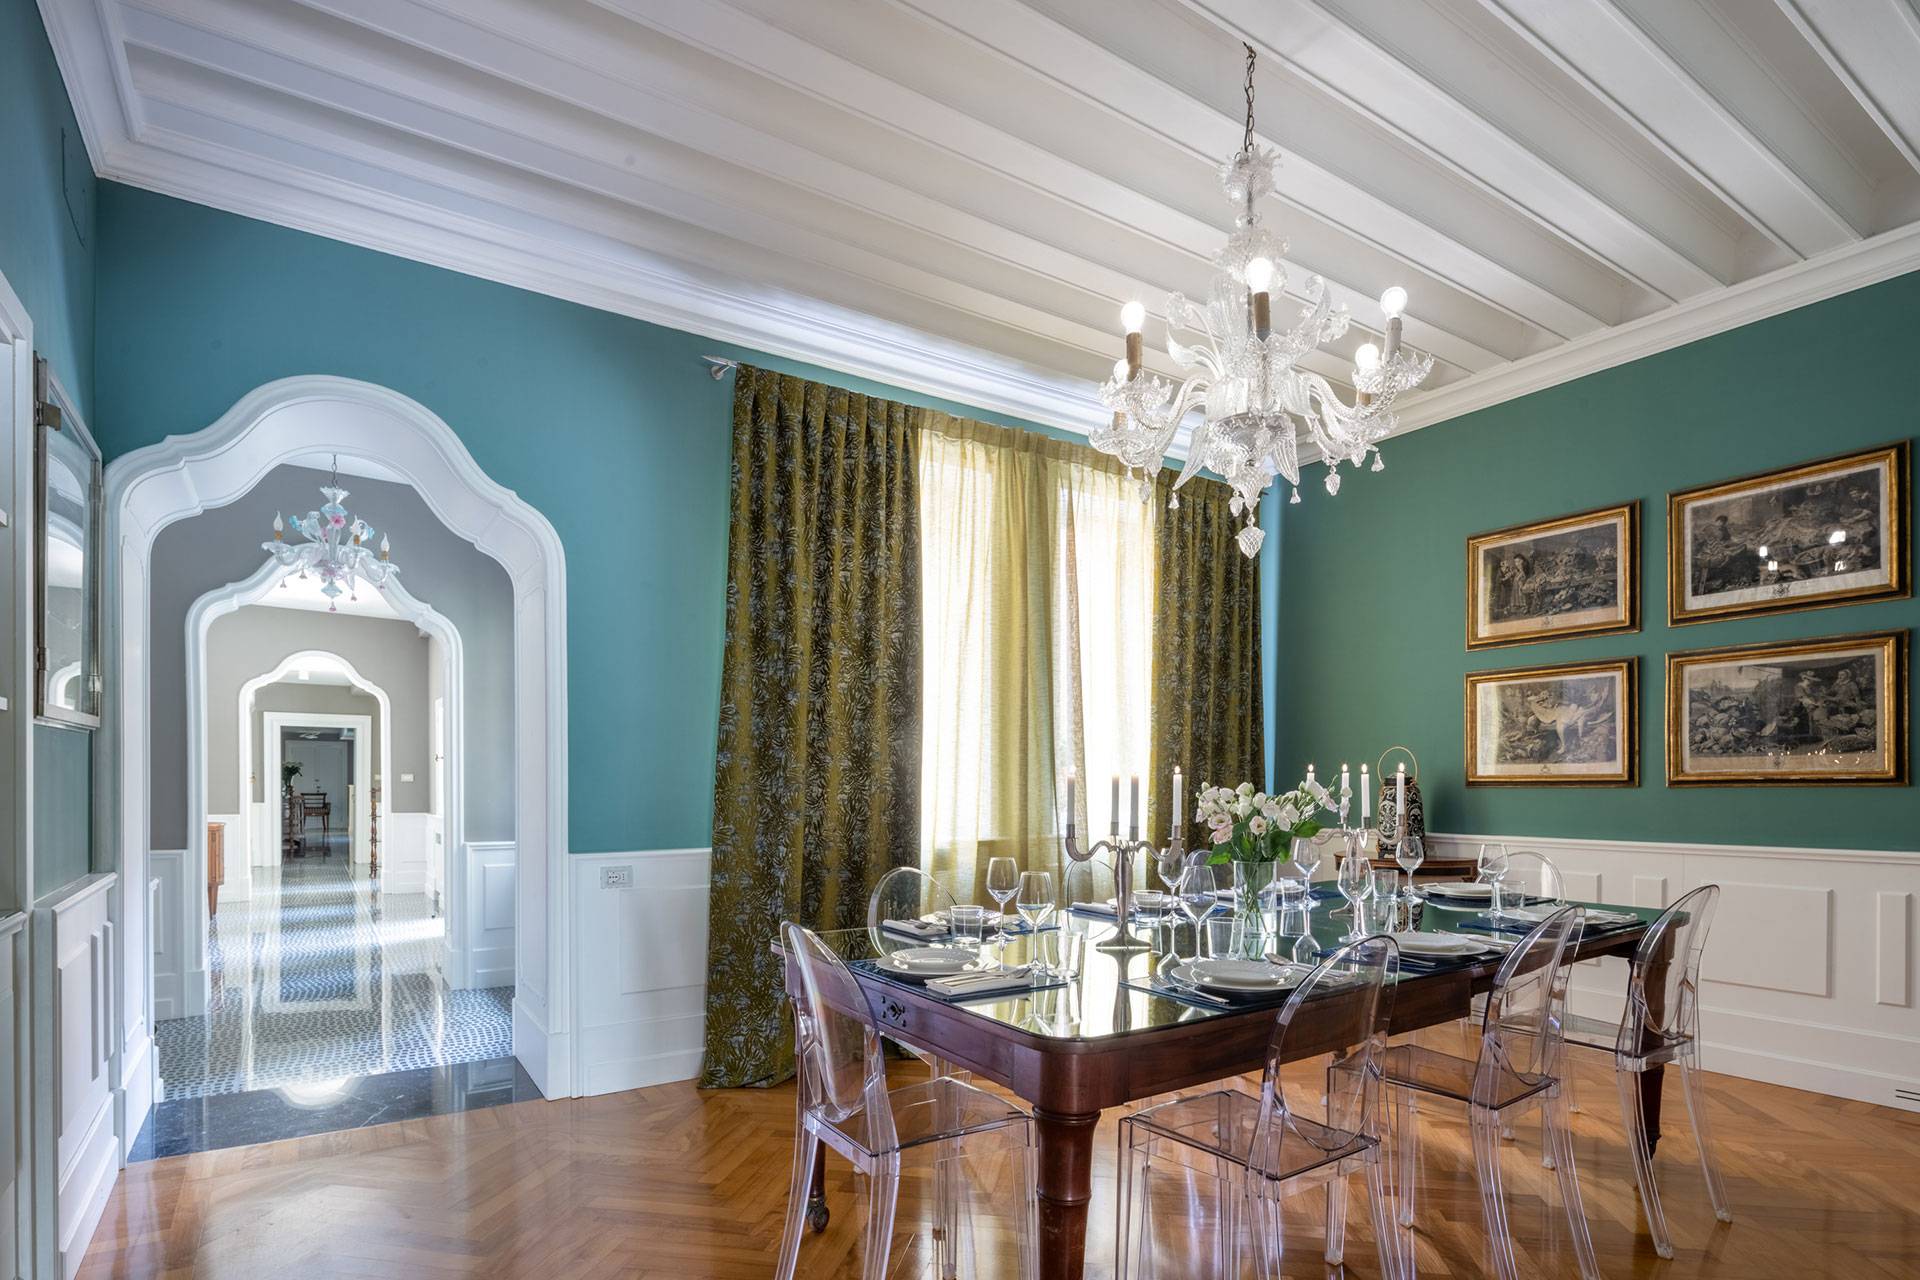 Classy and spacious dining room of the Dogaressa apartment